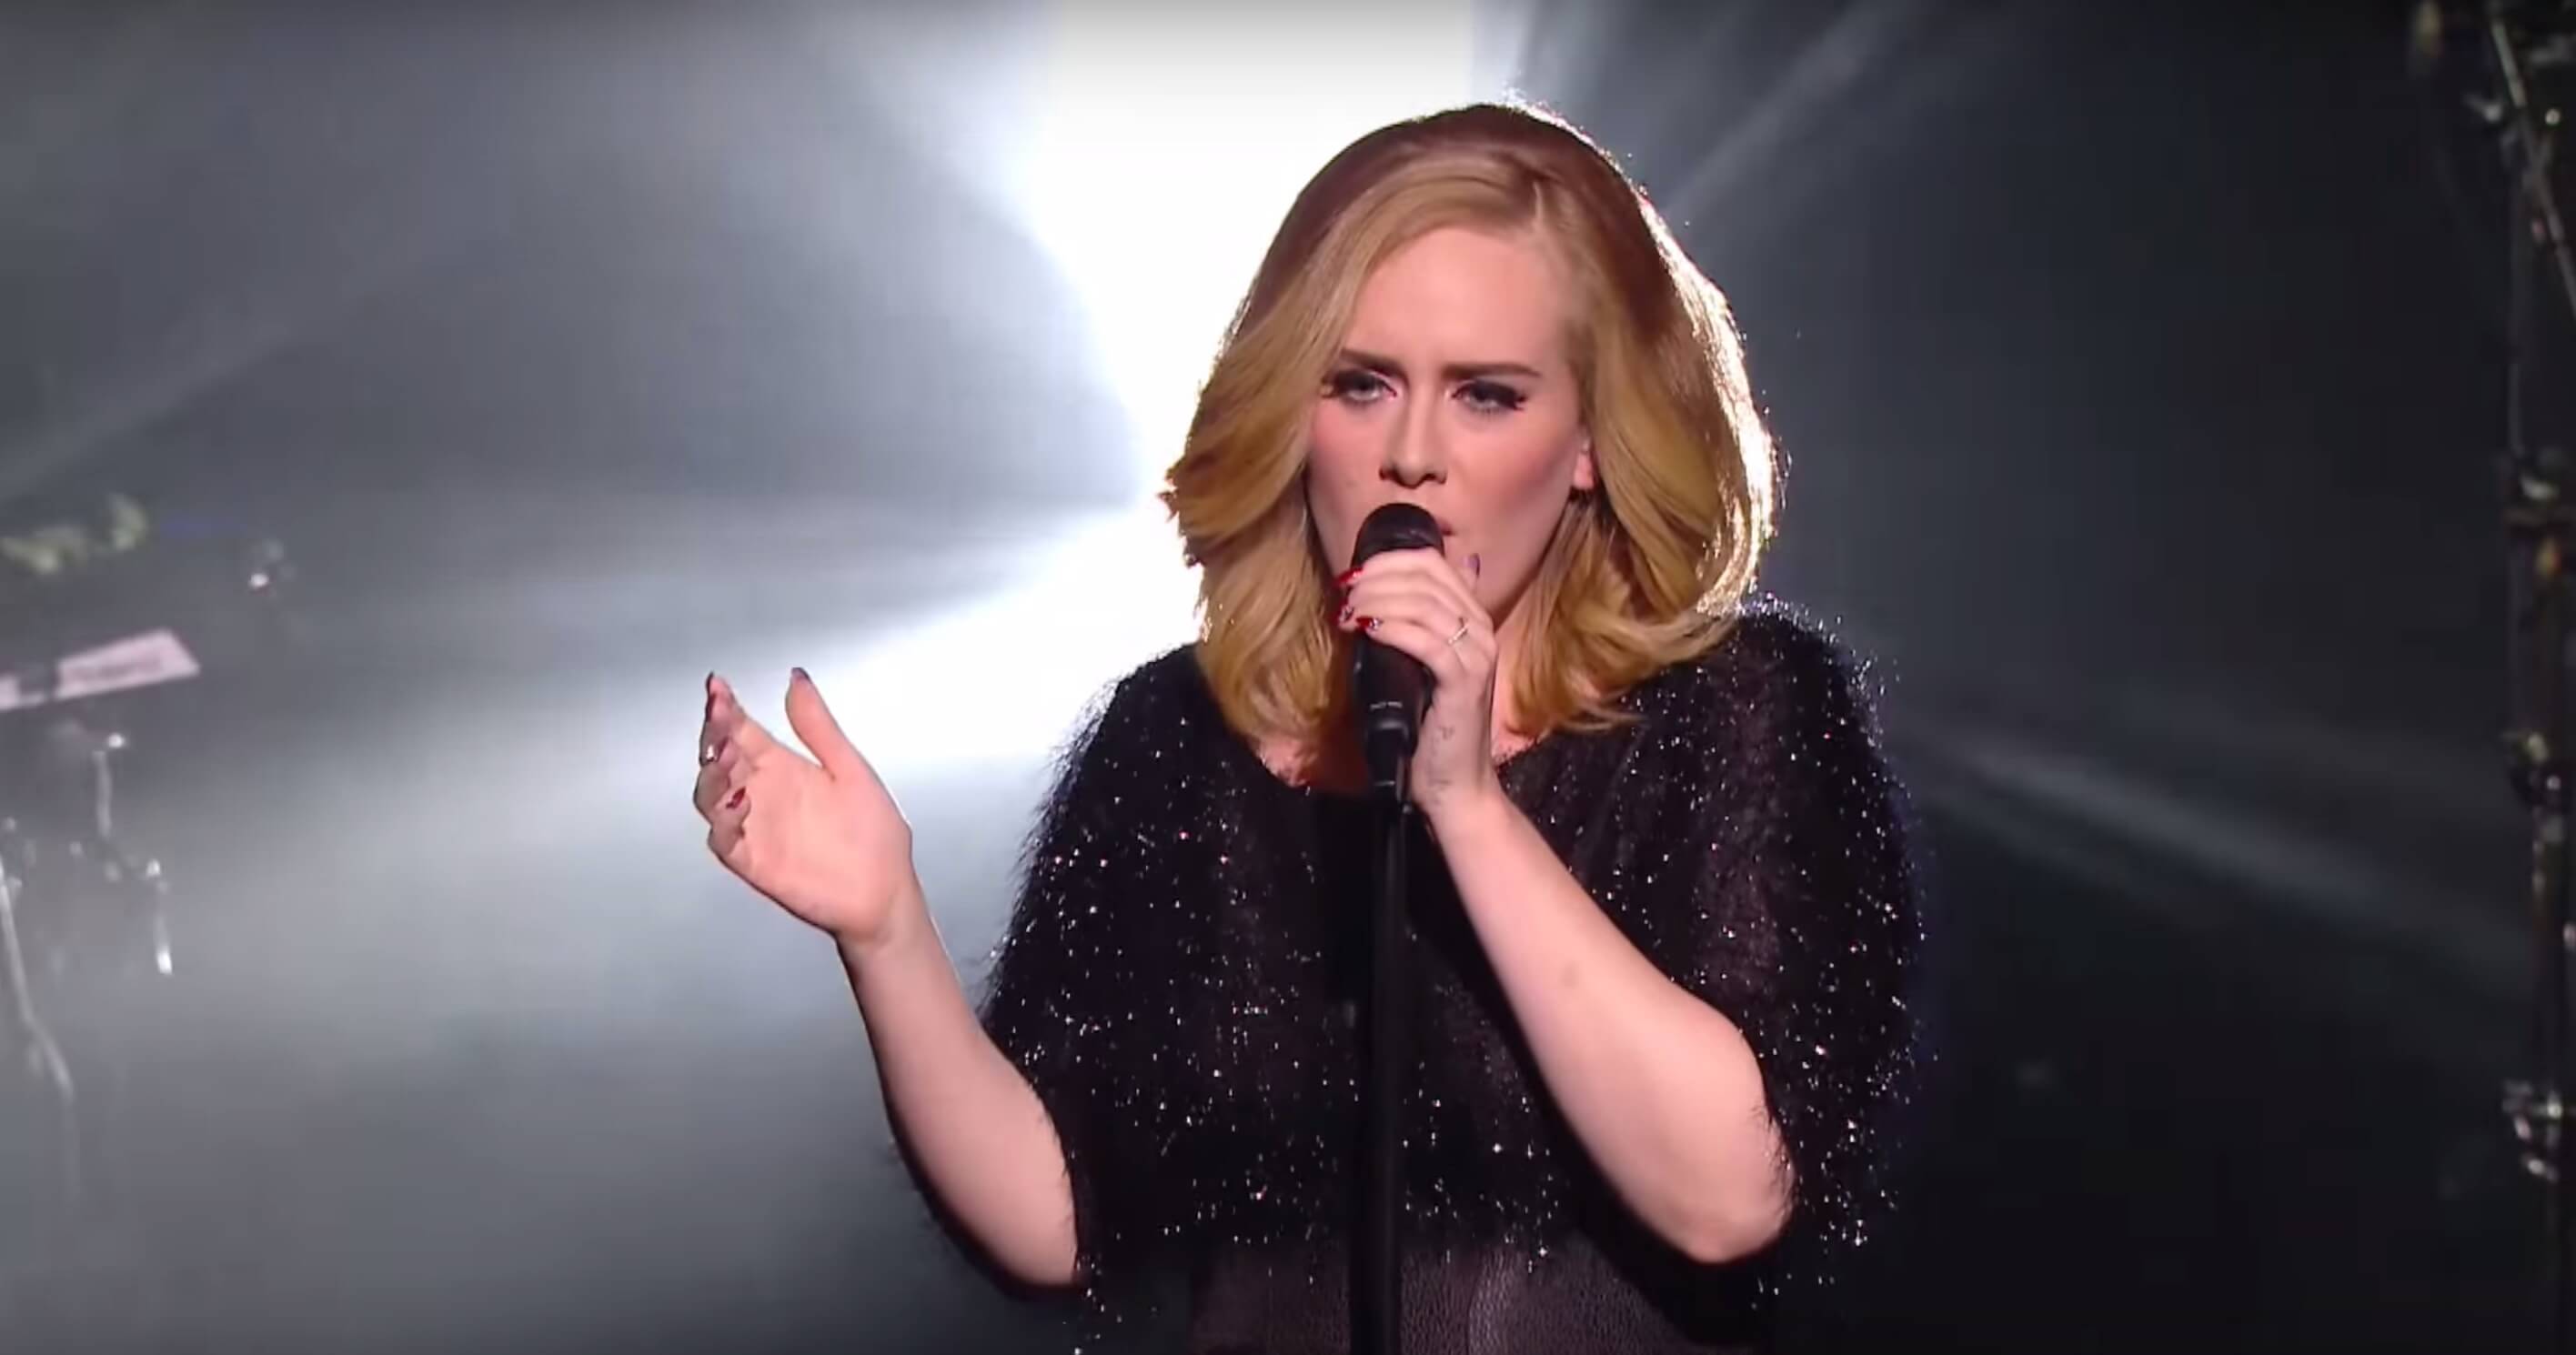 ... Adele Perform "Hello" Live For The First Time | Brooklyn Magazine